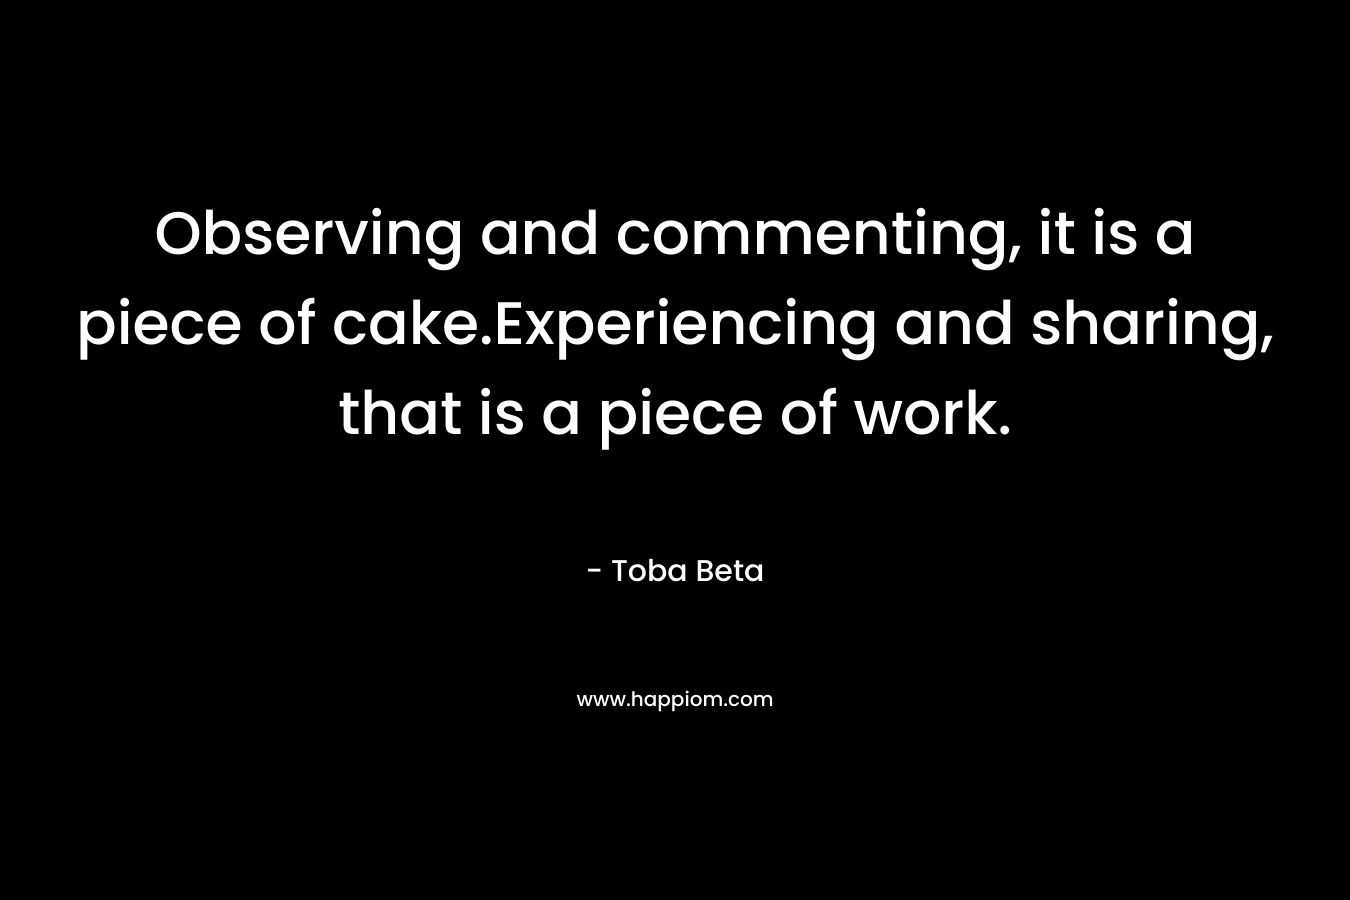 Observing and commenting, it is a piece of cake.Experiencing and sharing, that is a piece of work.